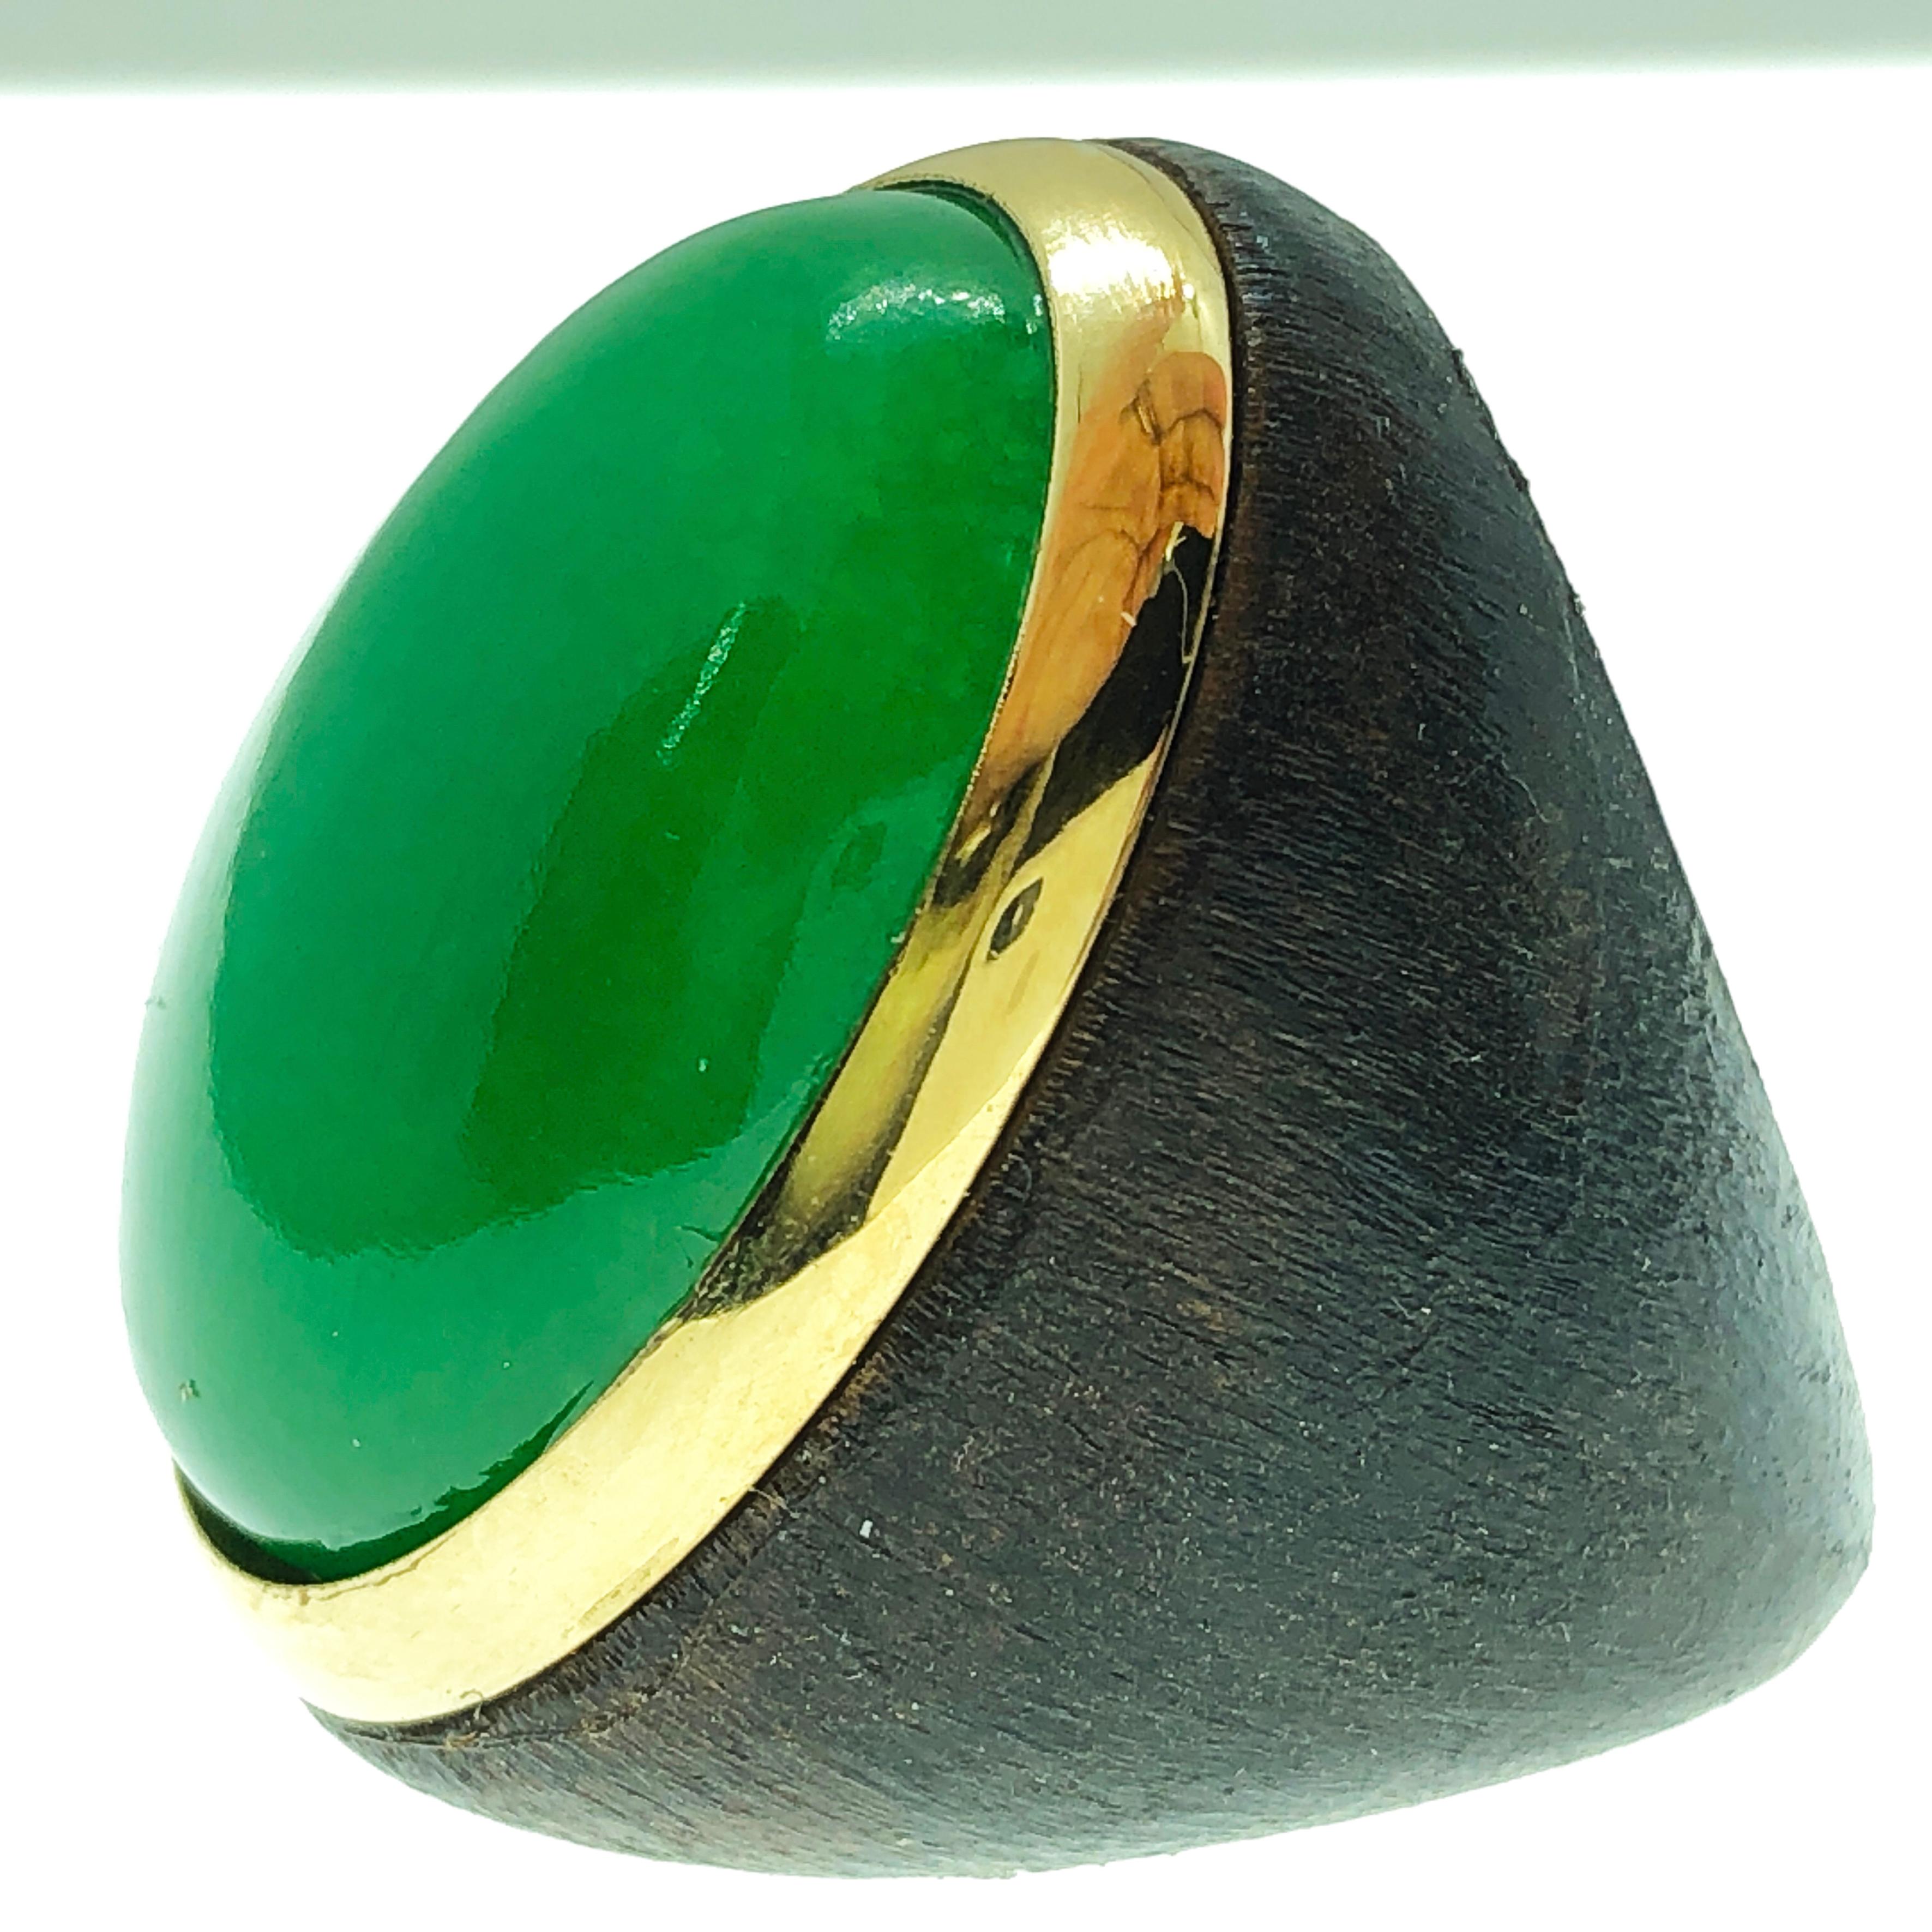 One-of-a-kind Contemporary Cocktail Ring Featuring a 27 Carat Natural Green Jade Cabochon (0.911x0.666in) in an 18K Yellow Gold Brown Oxidized Brass Setting.
The color-changing of the Green Jade's cabochon combined with the gold and brown brass